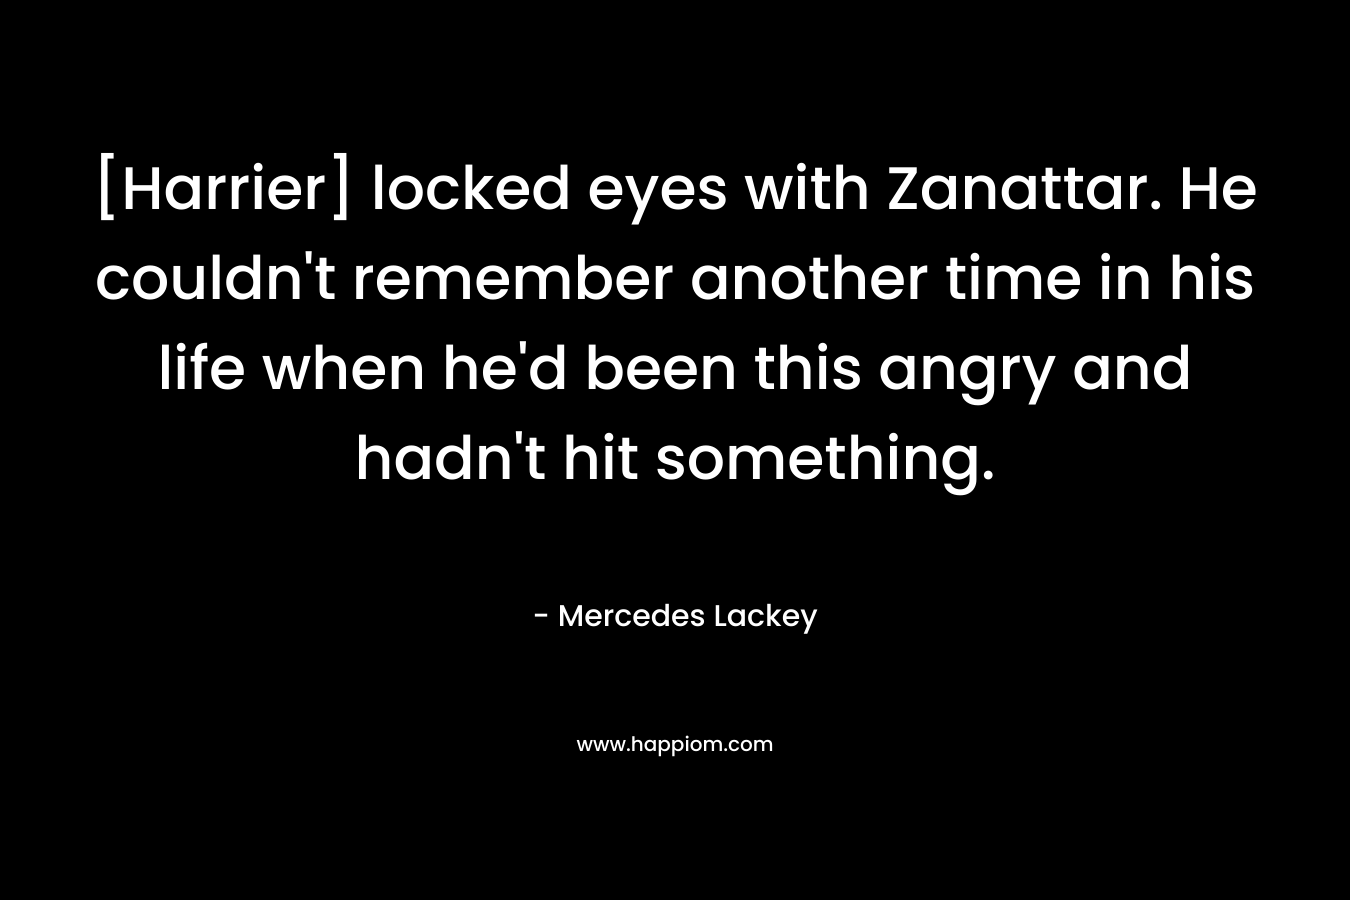 [Harrier] locked eyes with Zanattar. He couldn’t remember another time in his life when he’d been this angry and hadn’t hit something. – Mercedes Lackey